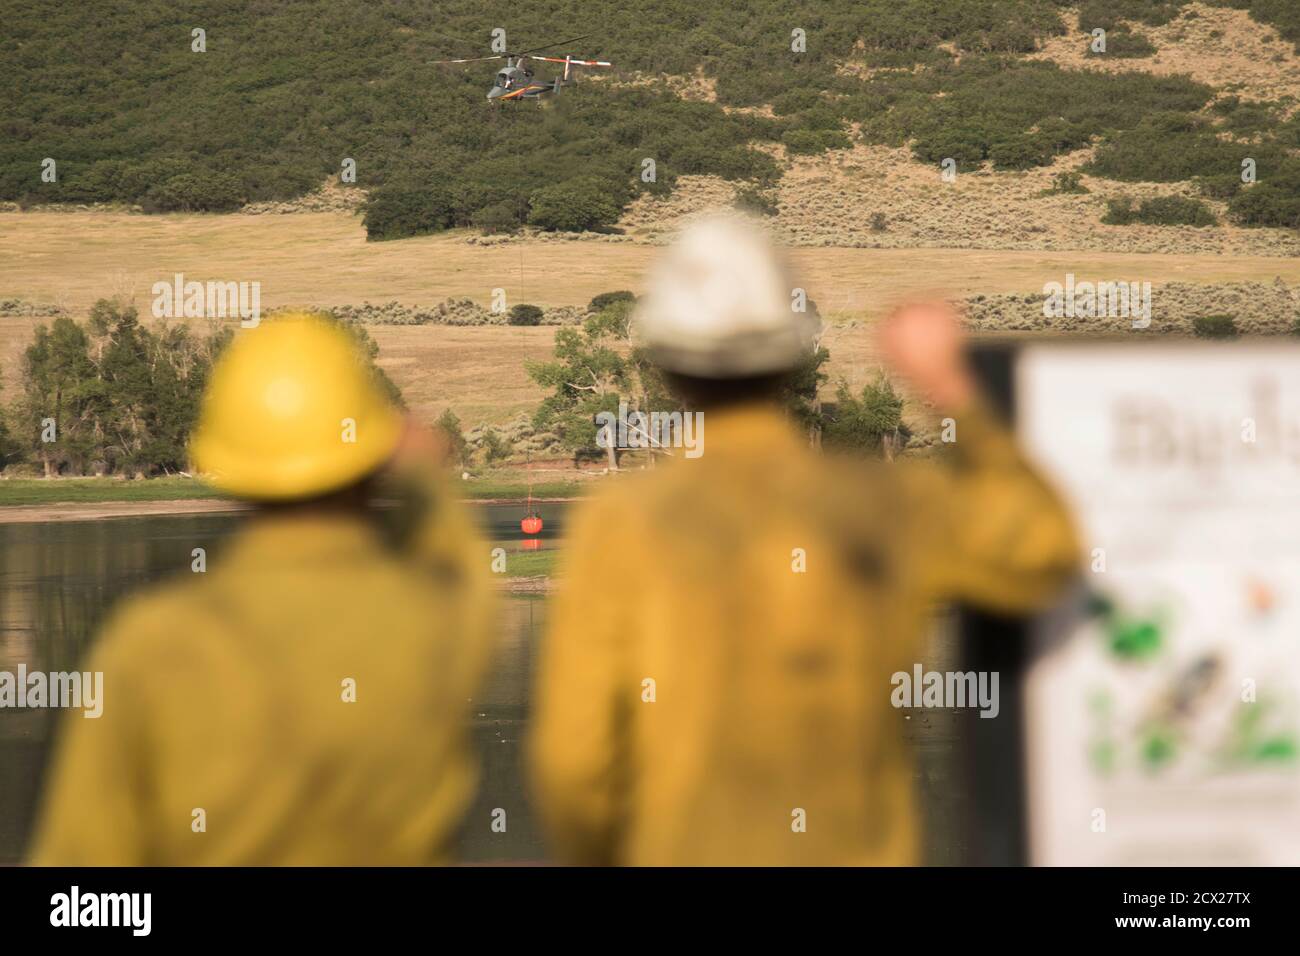 Rear view of firefighters looking at helicopter flying with fire retardant Stock Photo